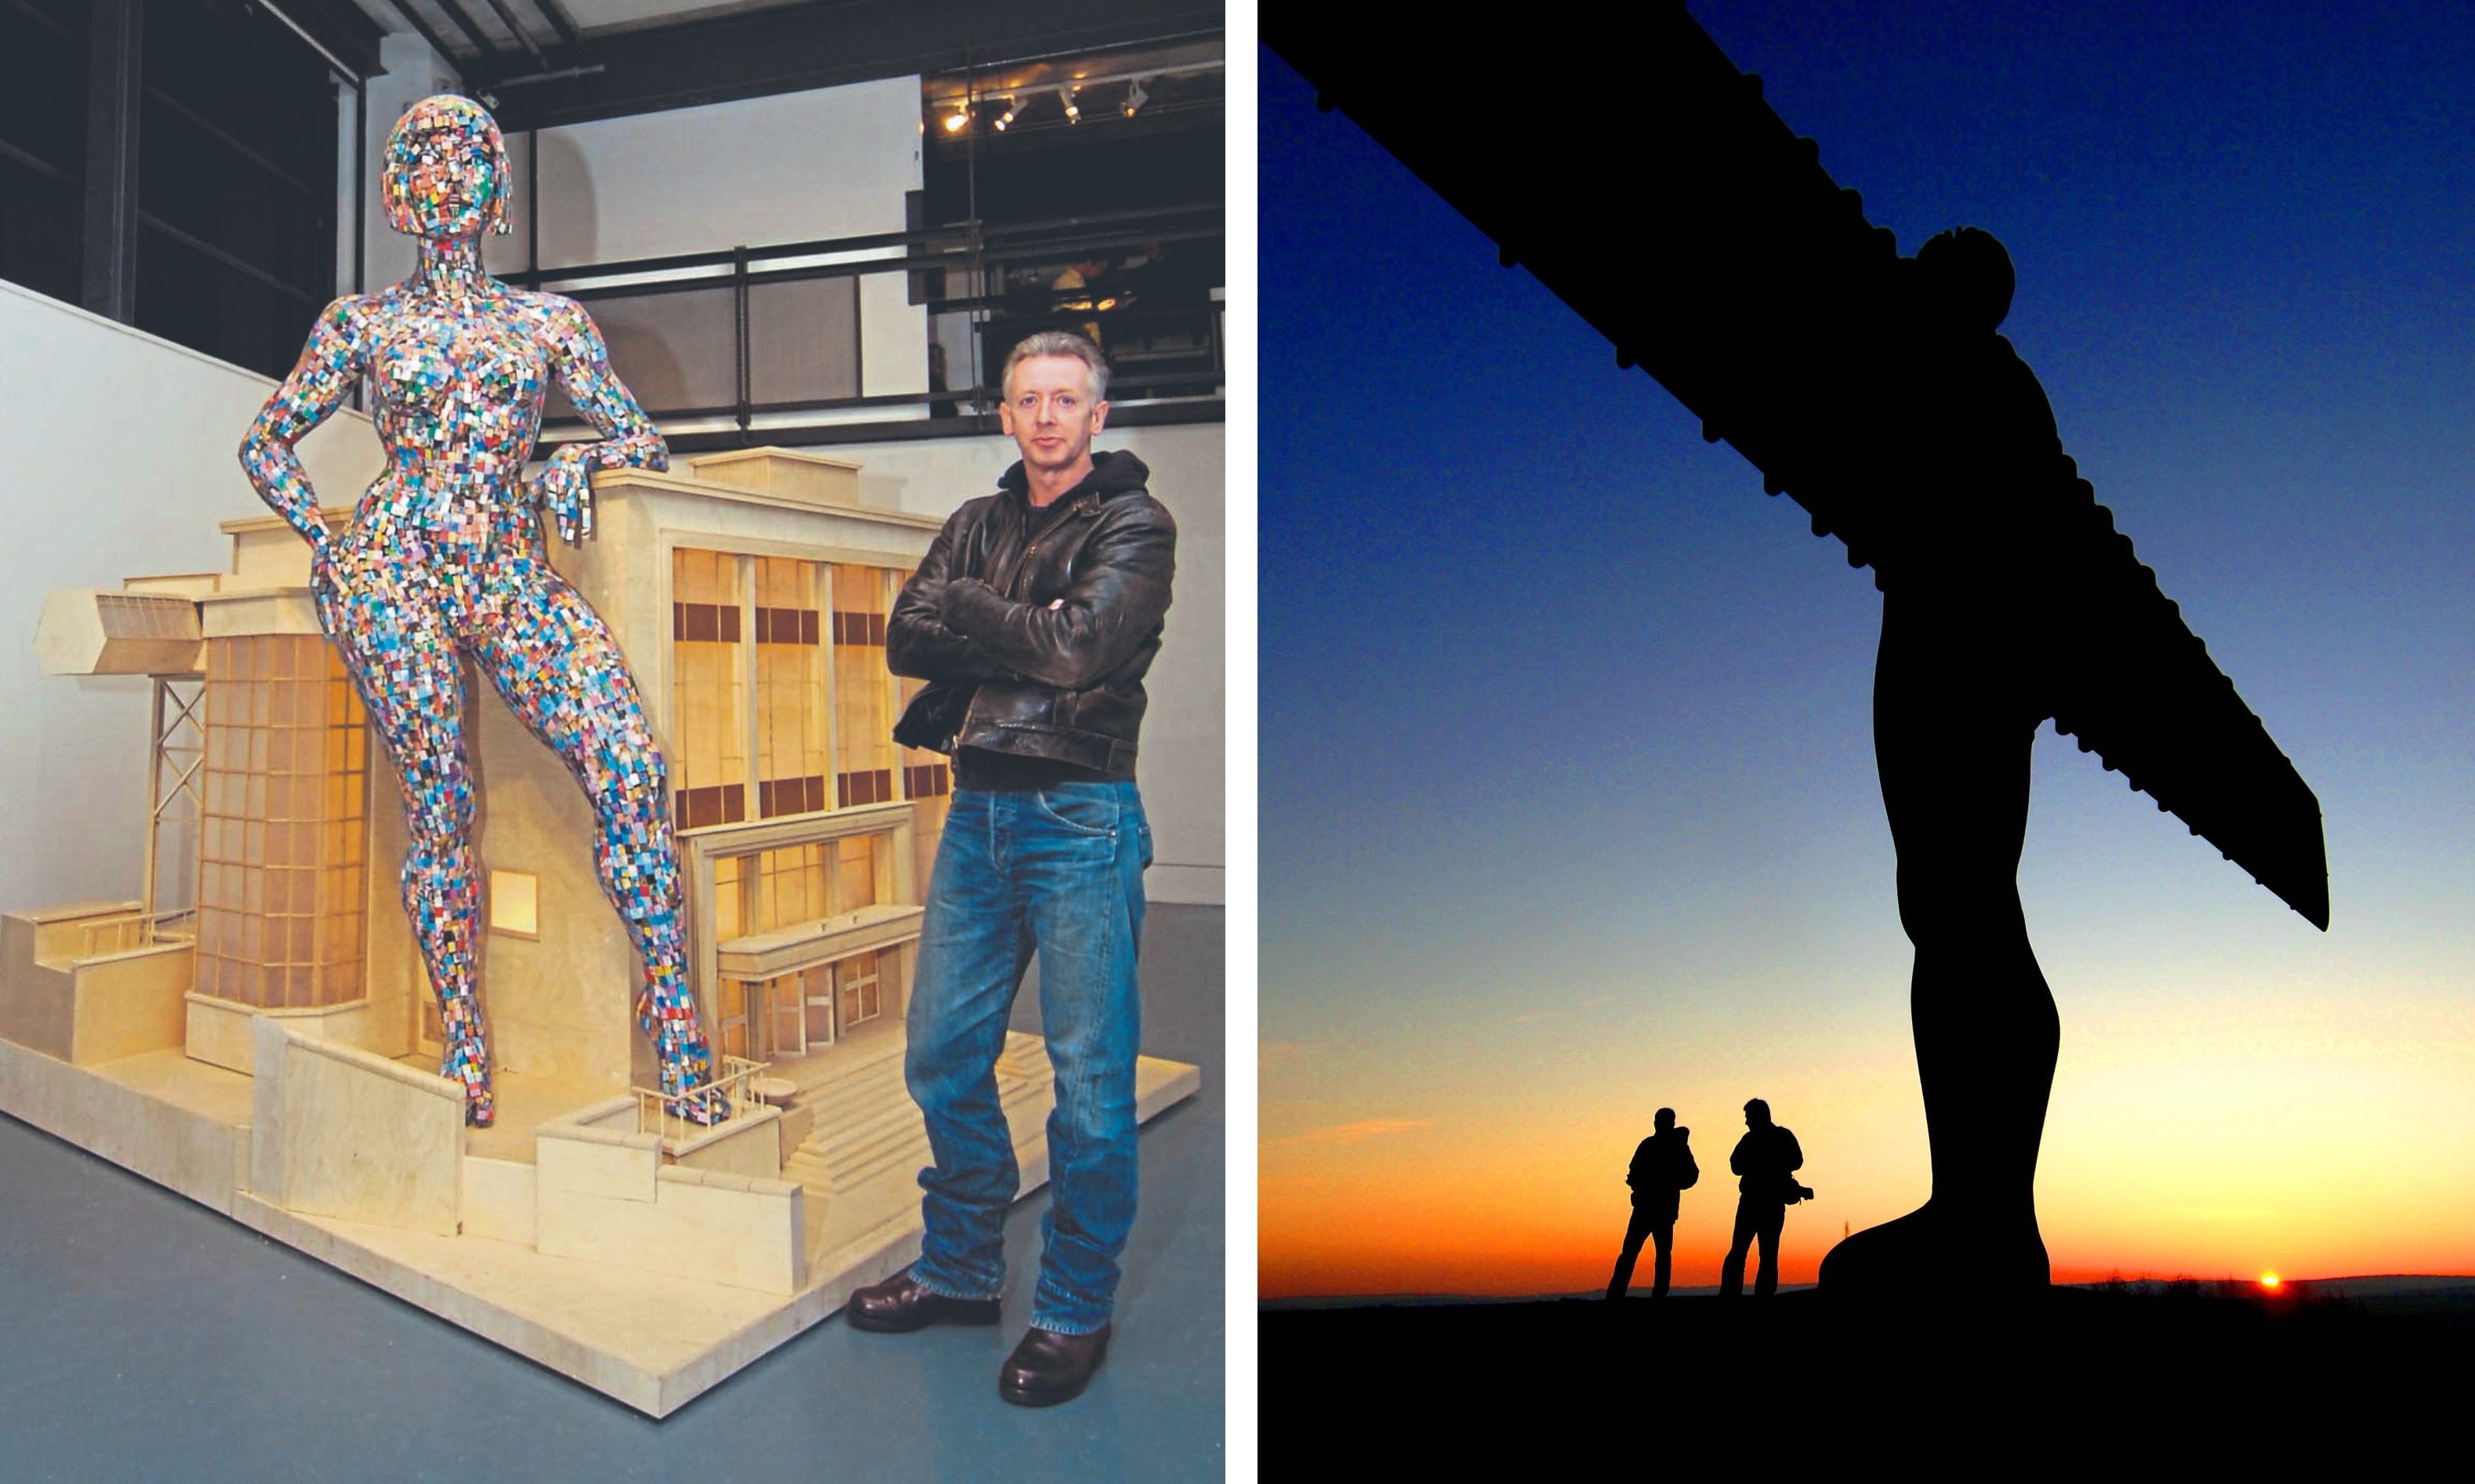 Left: Artist David Mach with a model of BioCollosus and DJCAD’s Crawford building. Right: The Angel of the North.